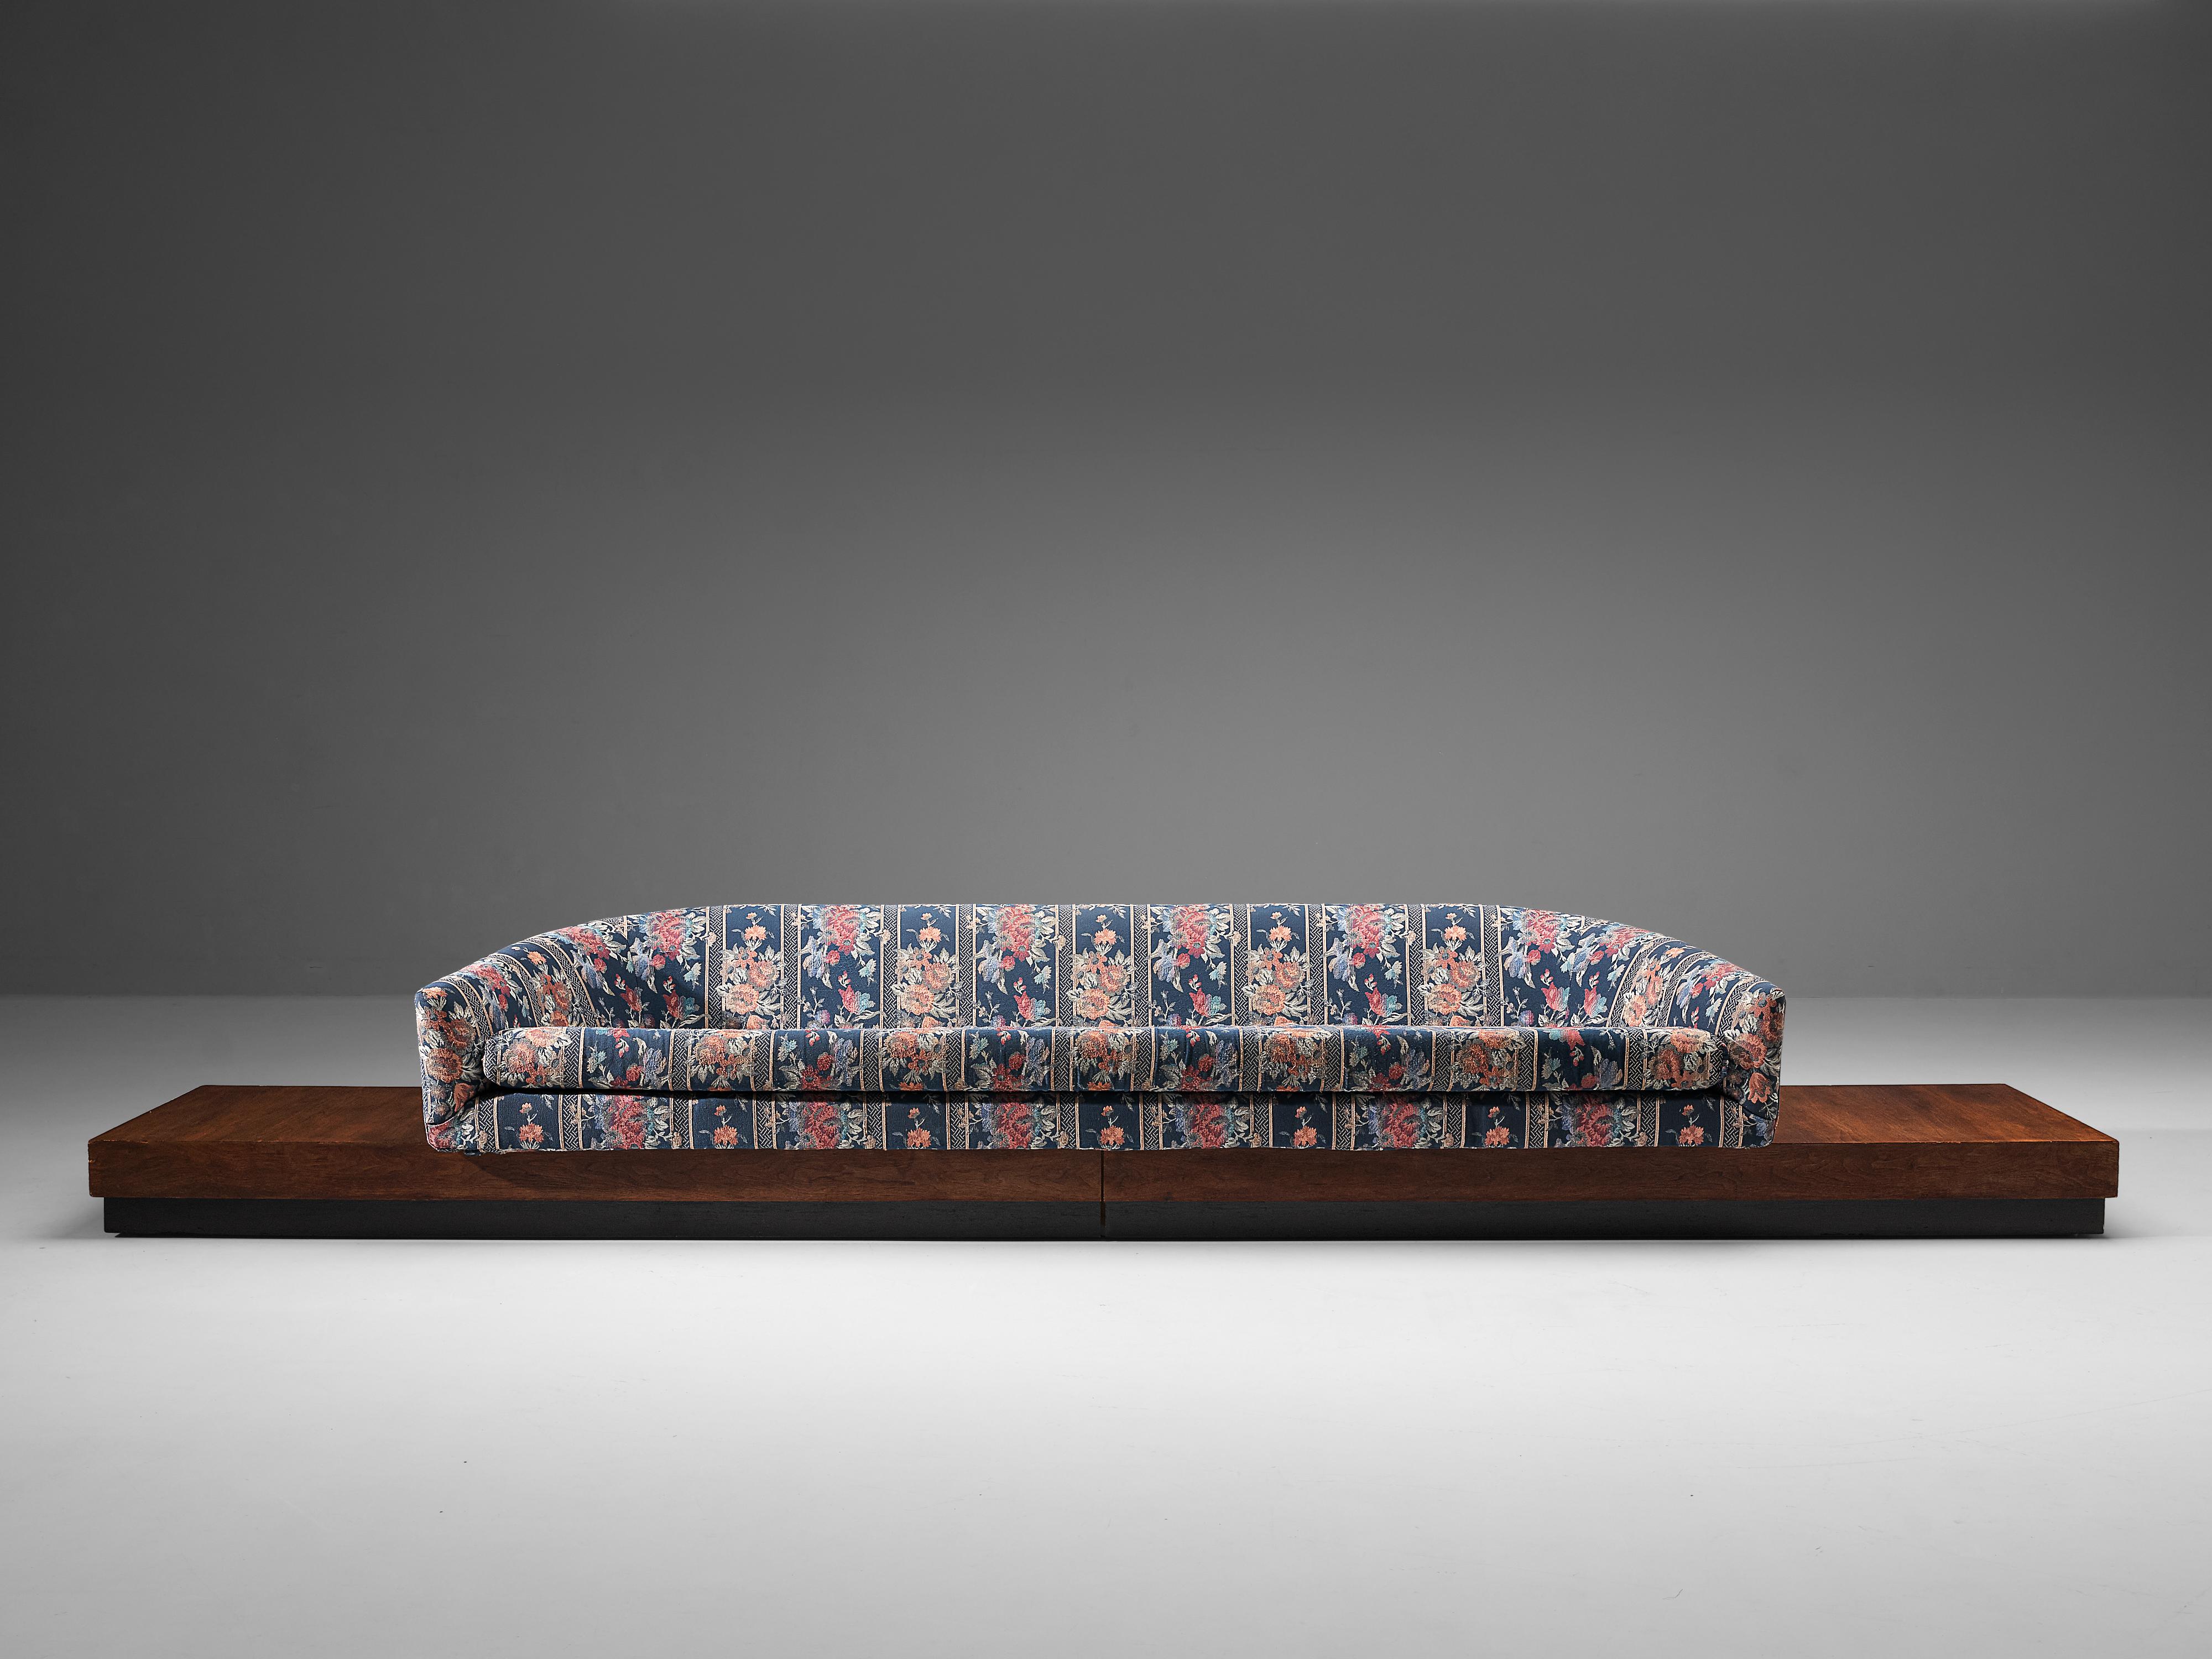 Adrian Pearsall, platform sofa, fabric, walnut, United States, 1960s

This beautifully shaped sofa designed by Adrian Pearsall is characterized by a solid construction, featuring clear lines and round edges. The sofa rests on a wooden platform